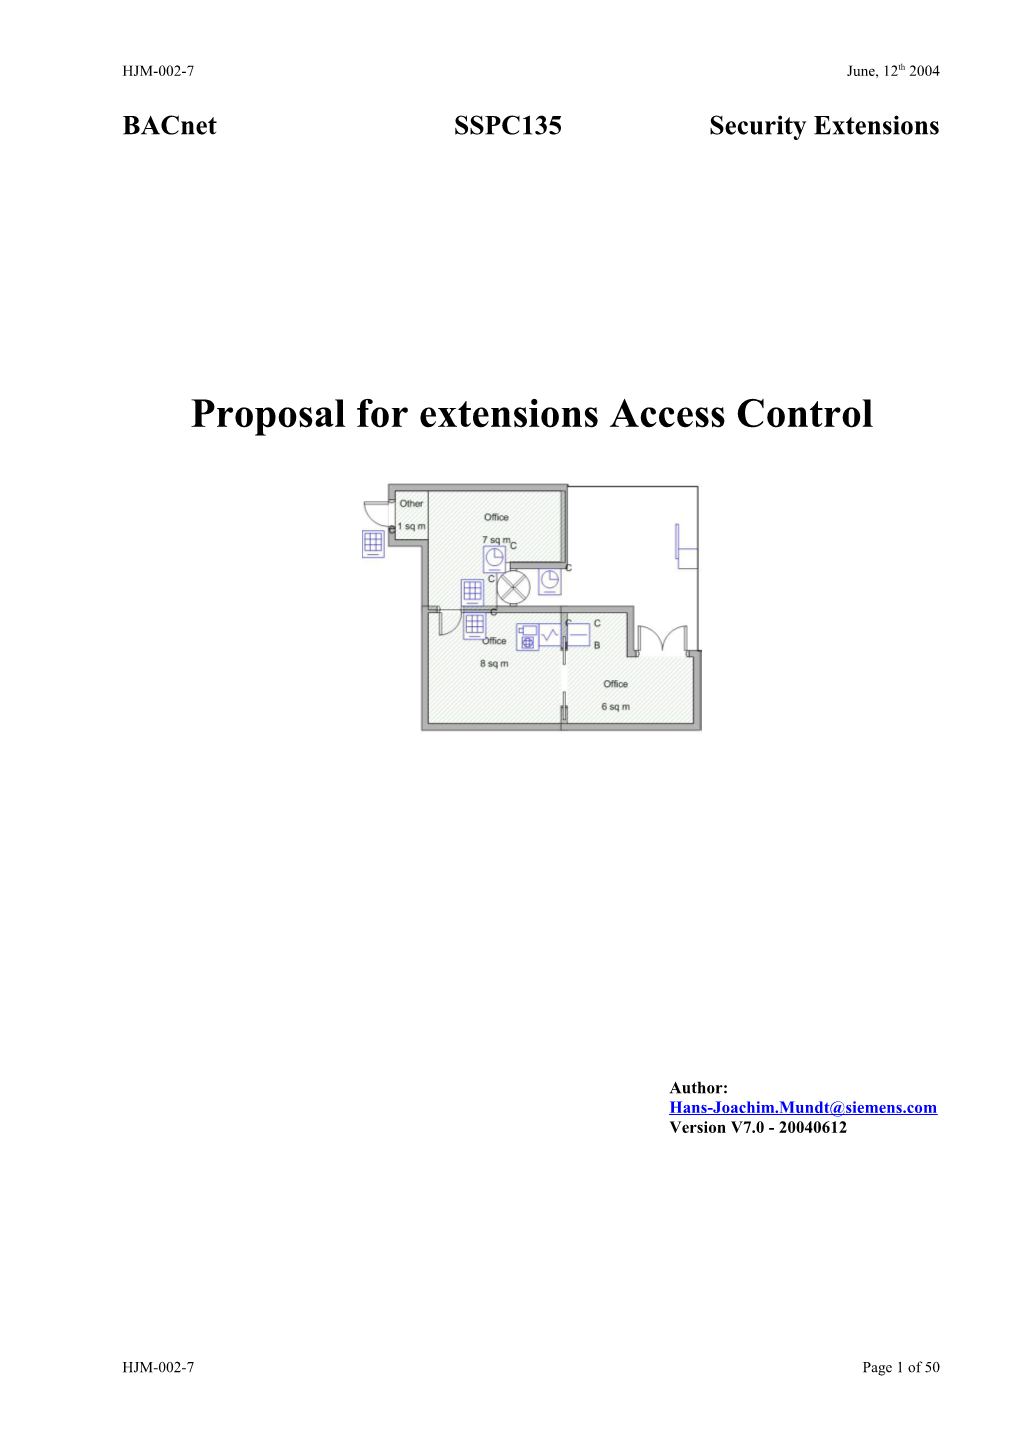 Proposal for Security Extension